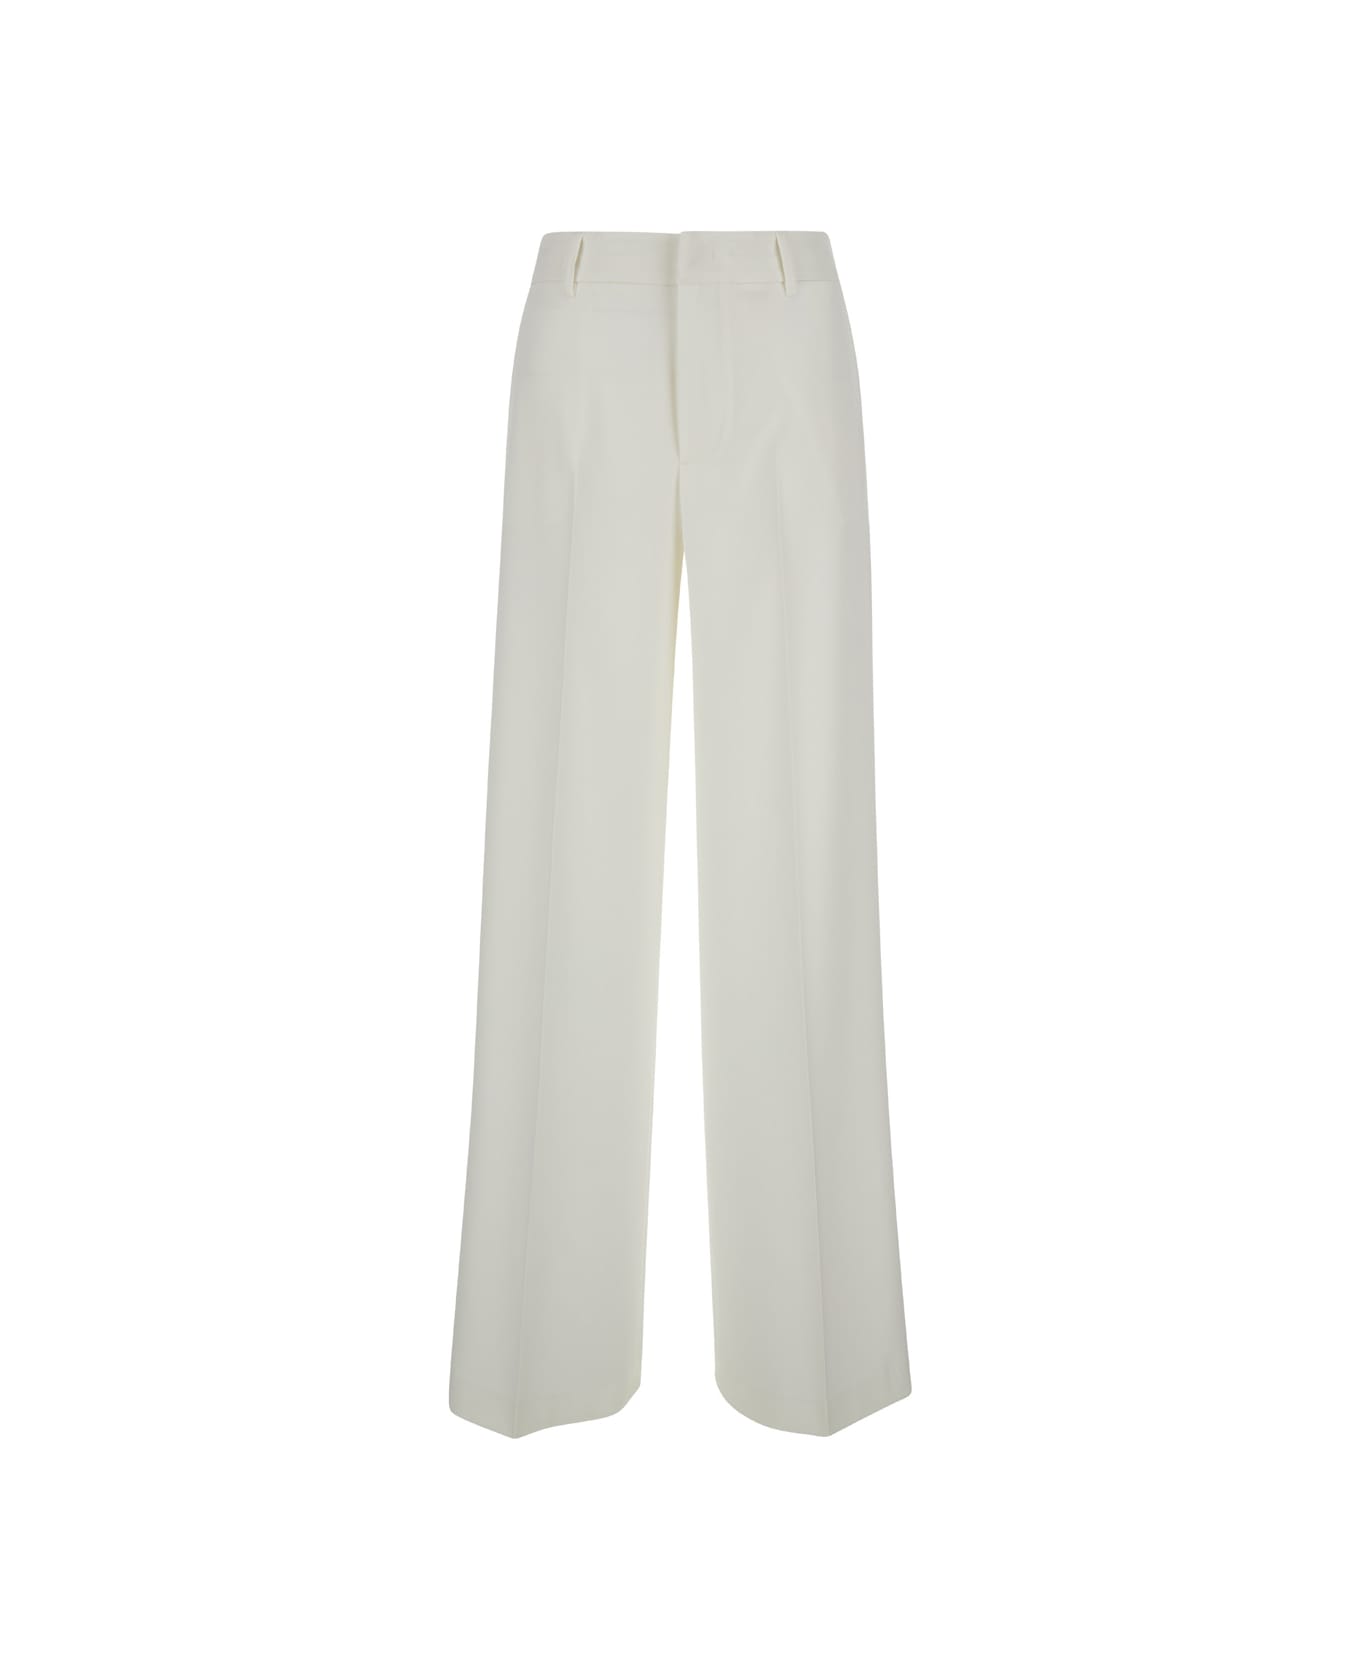 PT01 Tailored 'lorenza' High Waisted White Trousers In Technical Fabric Woman - White ボトムス